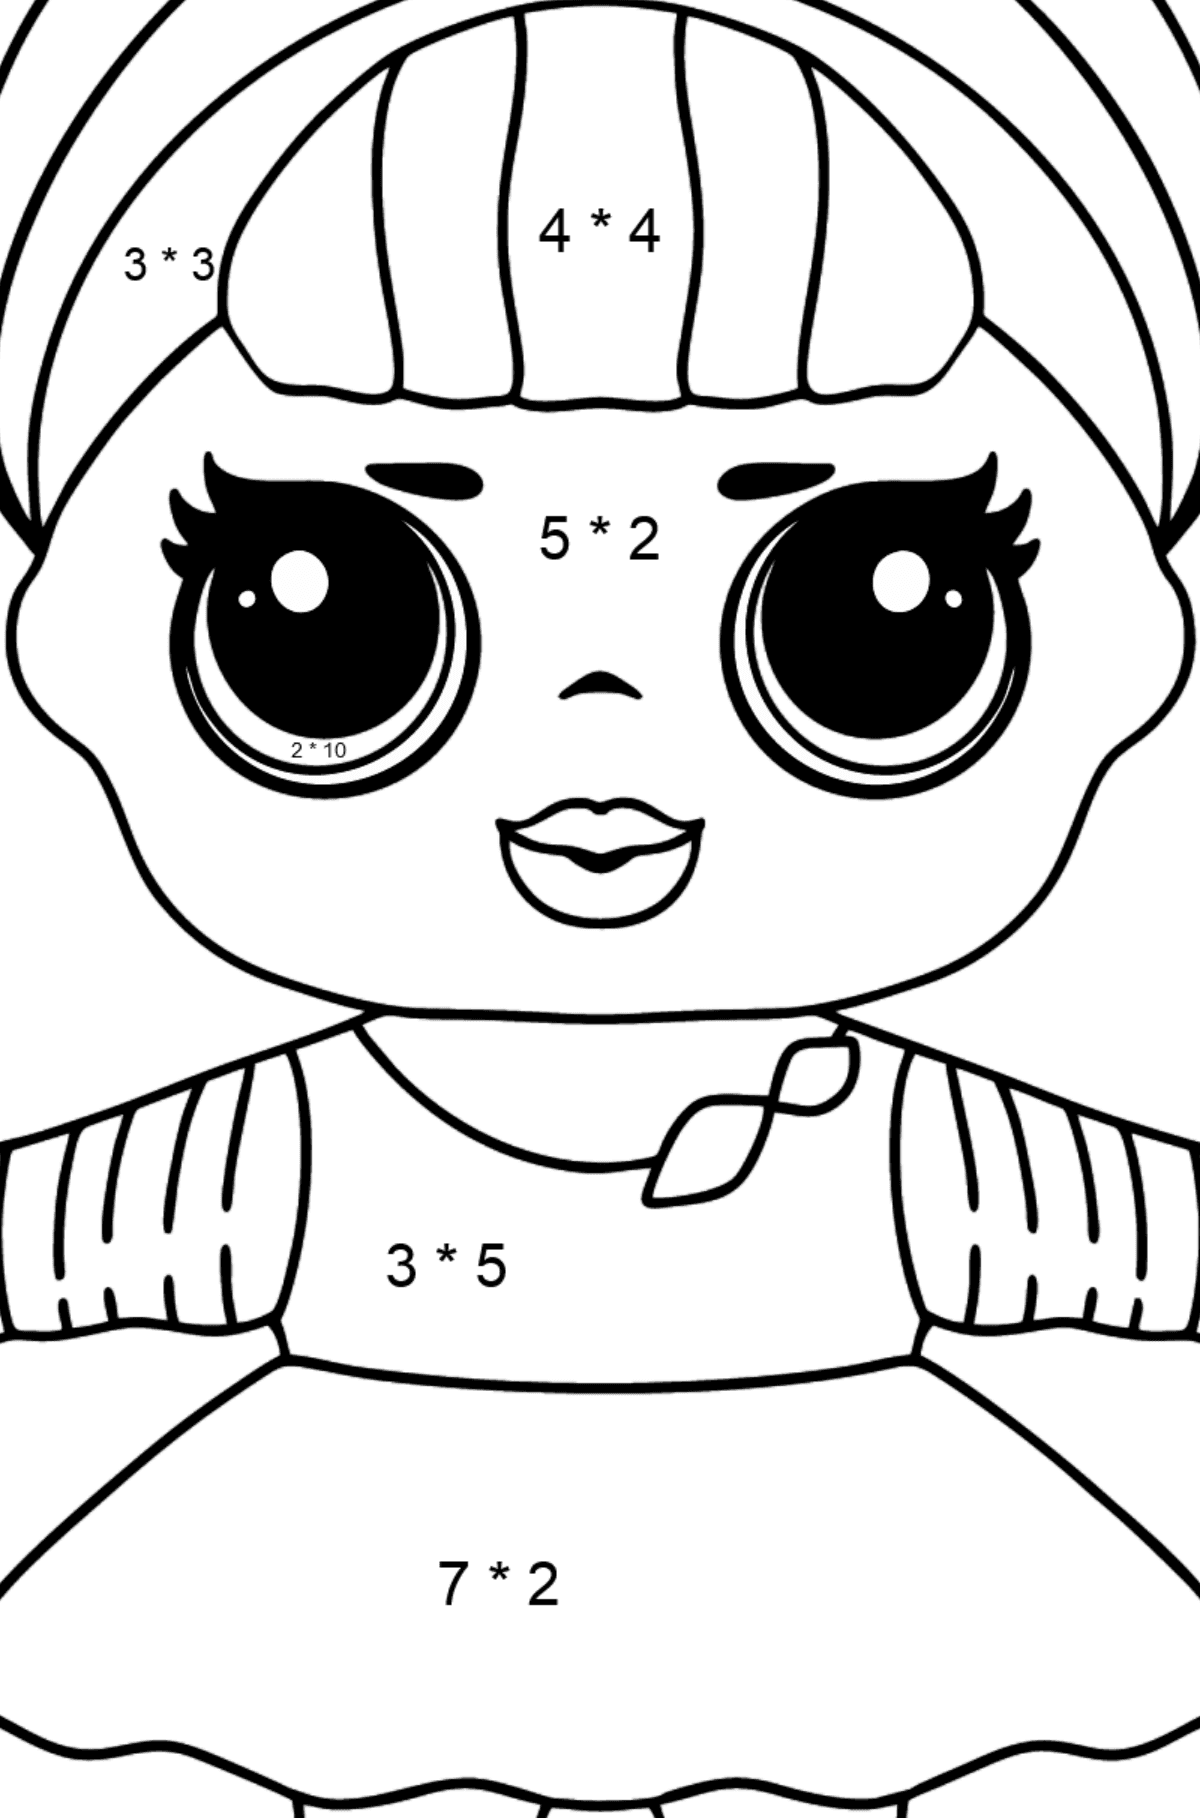 LOL Surprise Doll Sis Swing Coloring page - Math Coloring - Multiplication for Kids